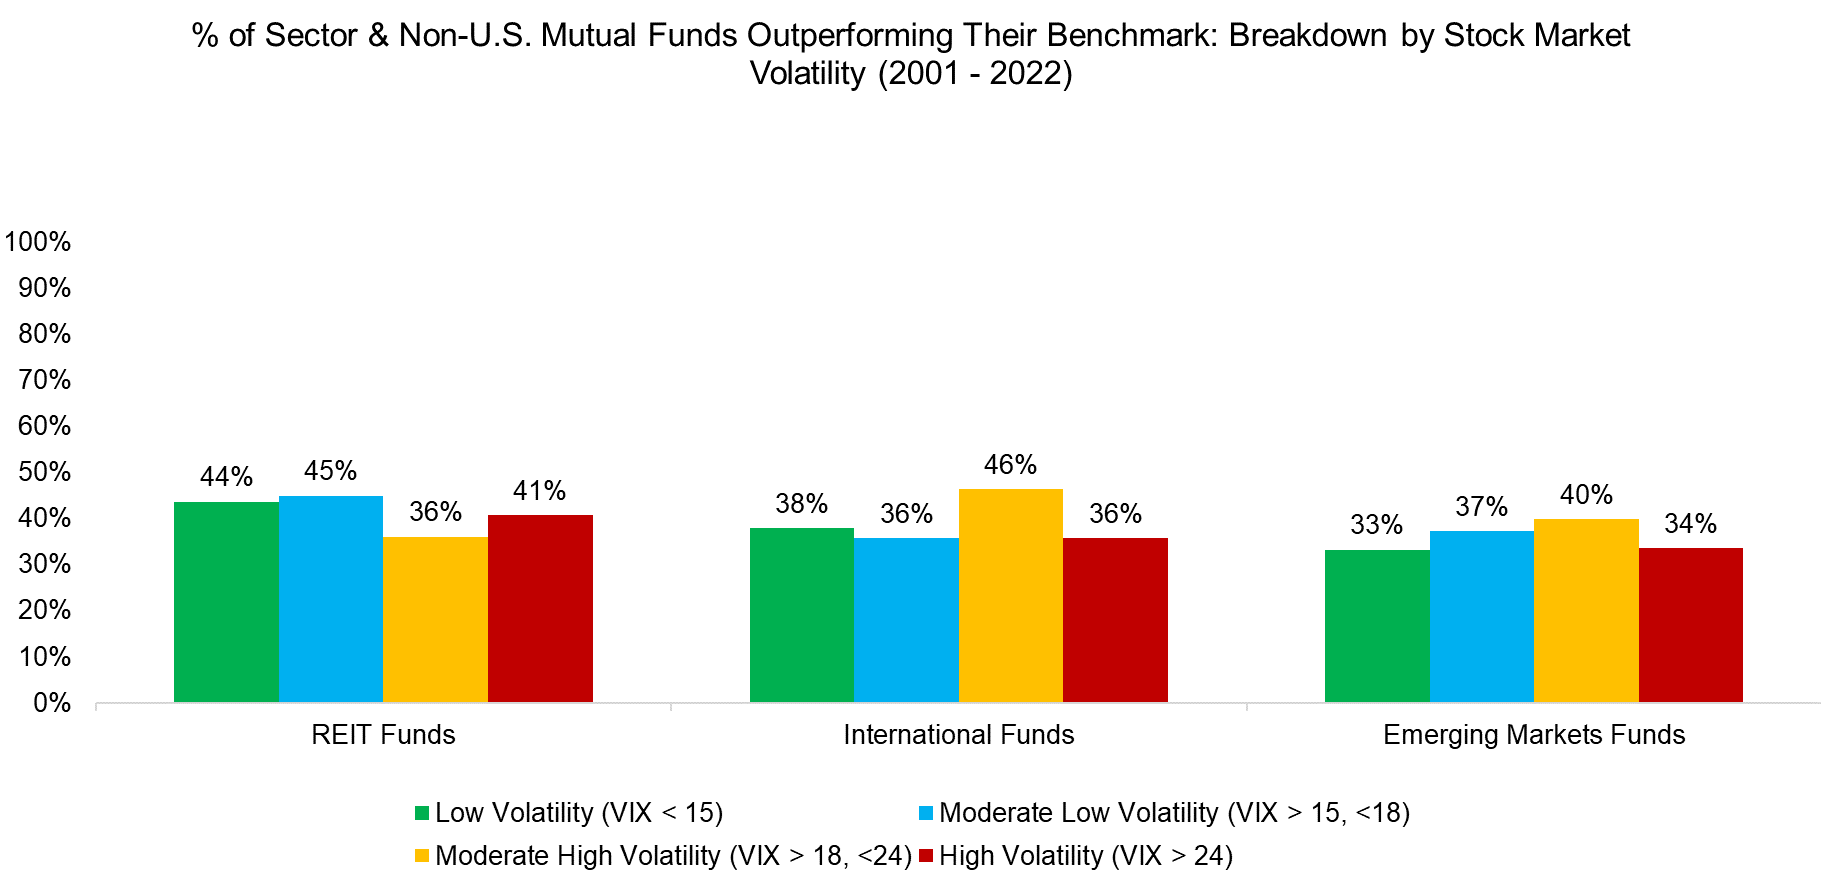 % of Sector & Non-U.S. Mutual Funds Outperforming Their Benchmark Breakdown by Stock Market Volatility (2001 - 2022)